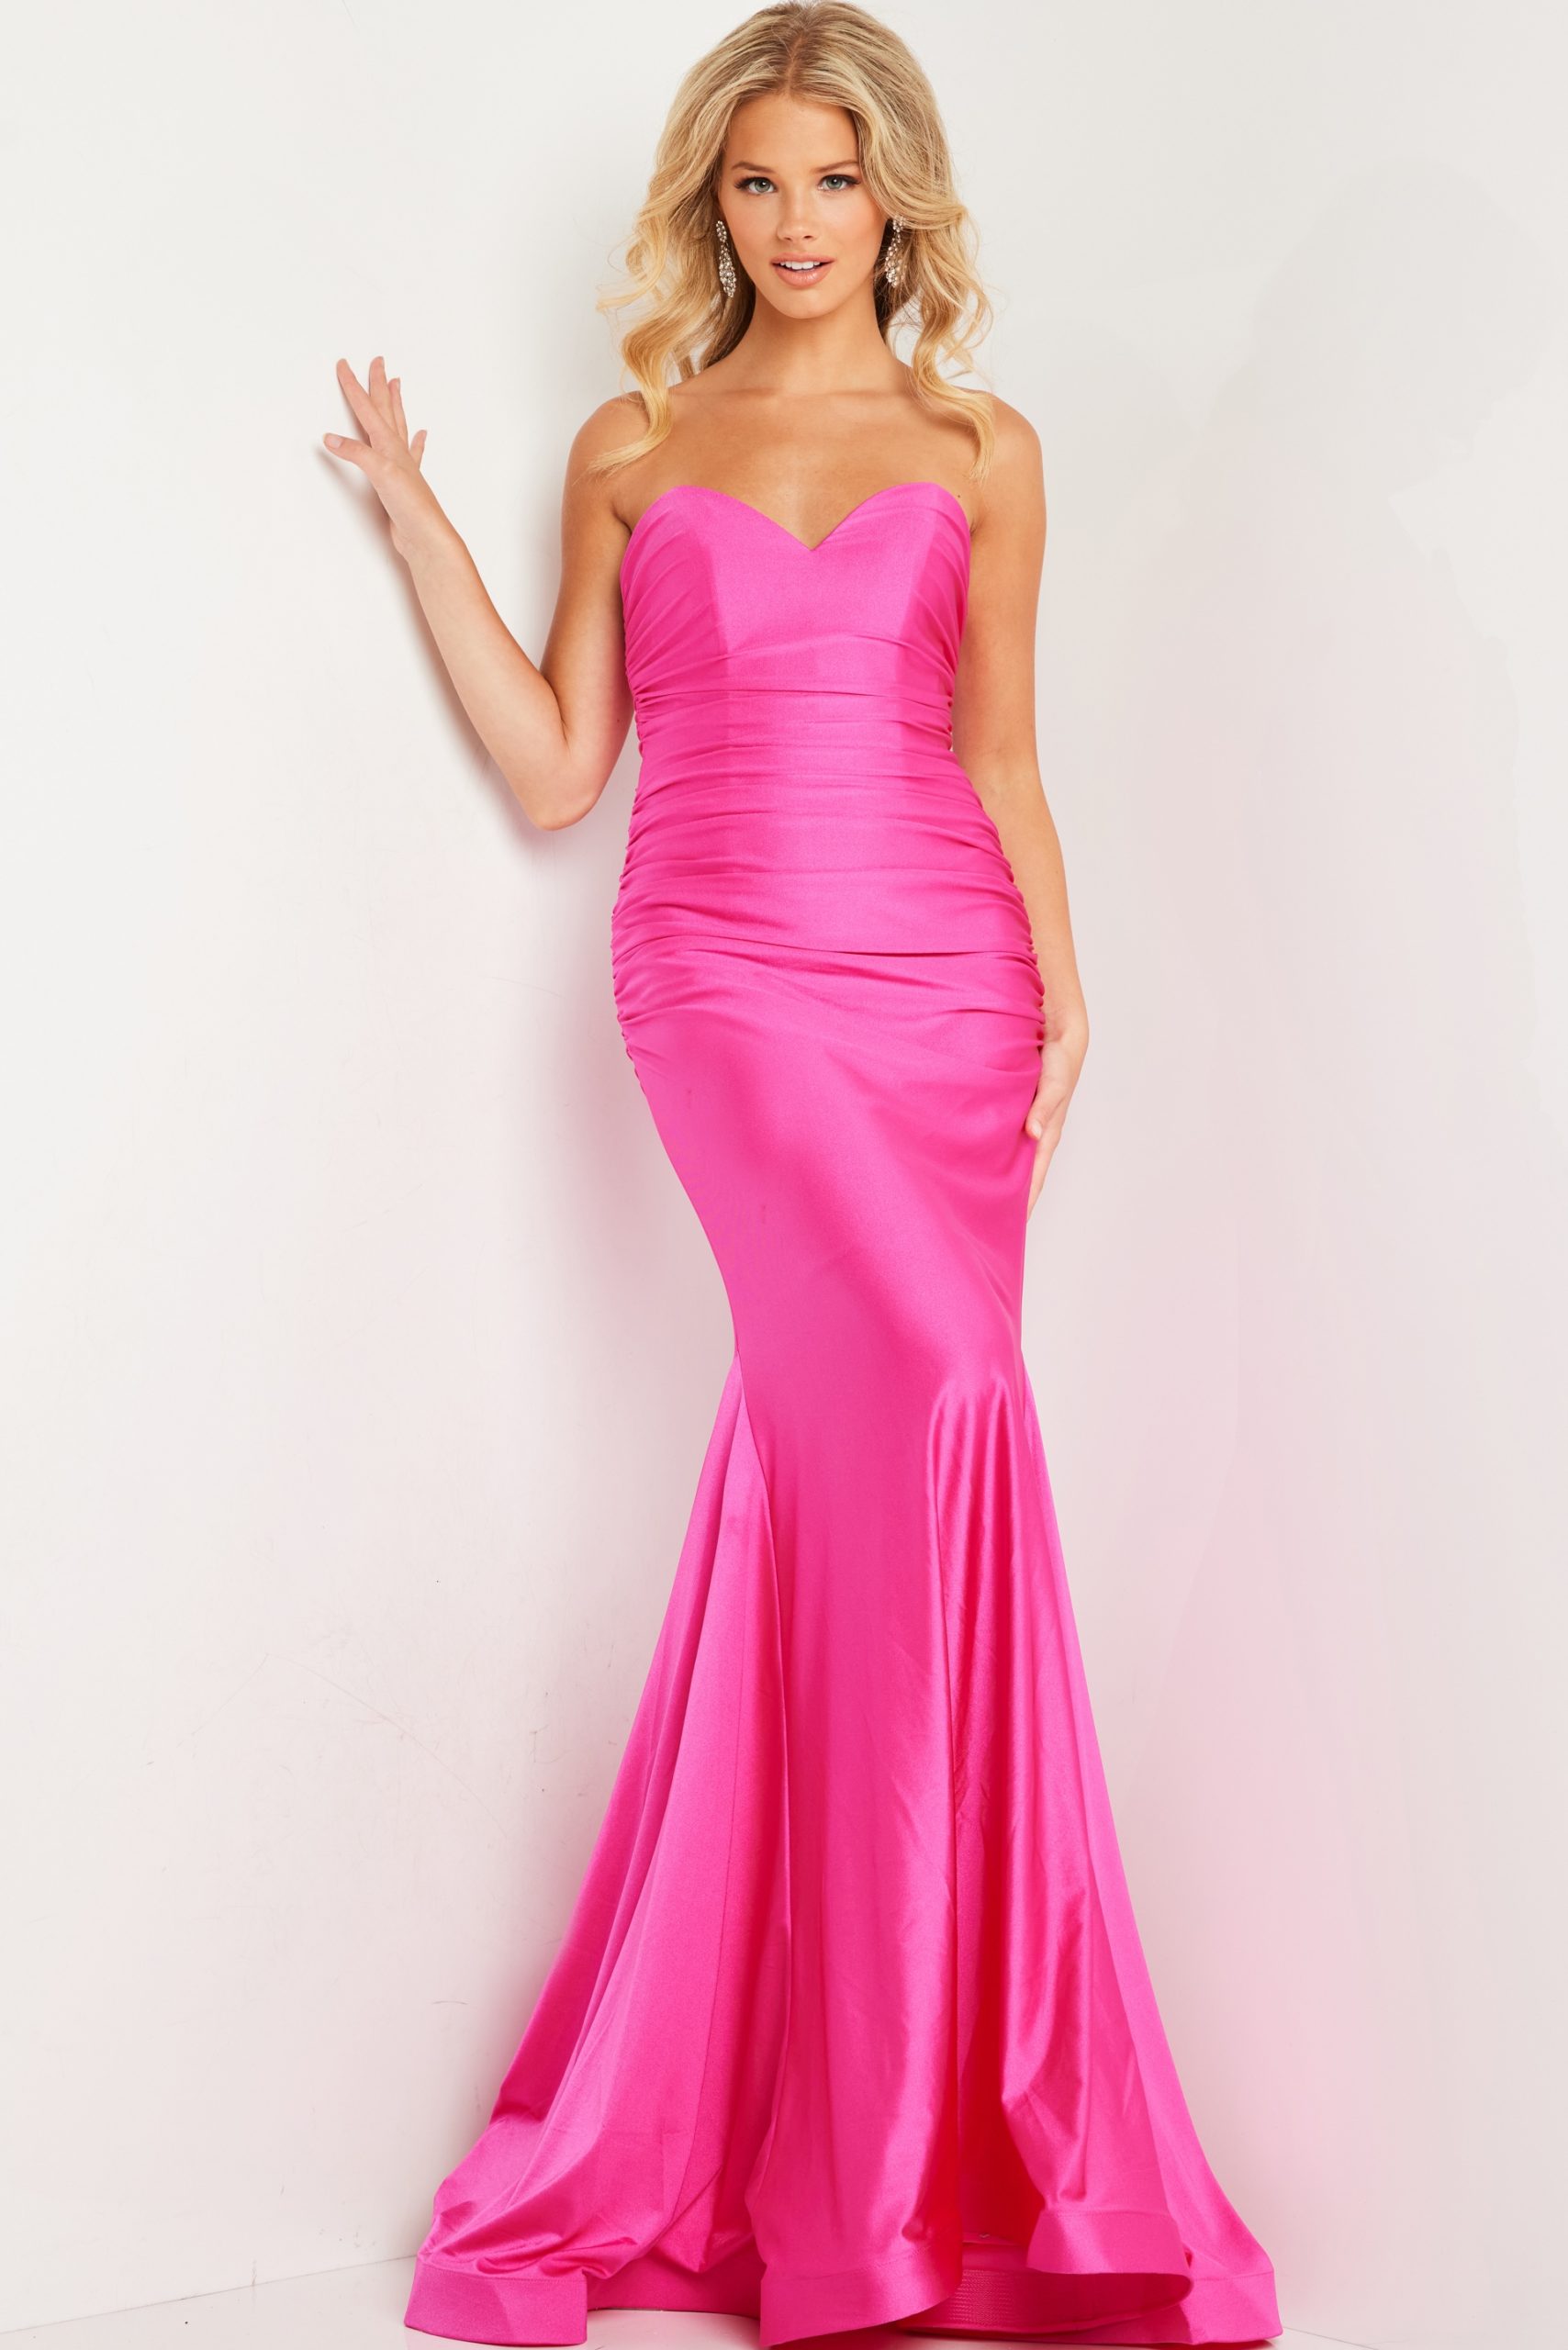 Fuchsia Strapless Fitted Dress 37006